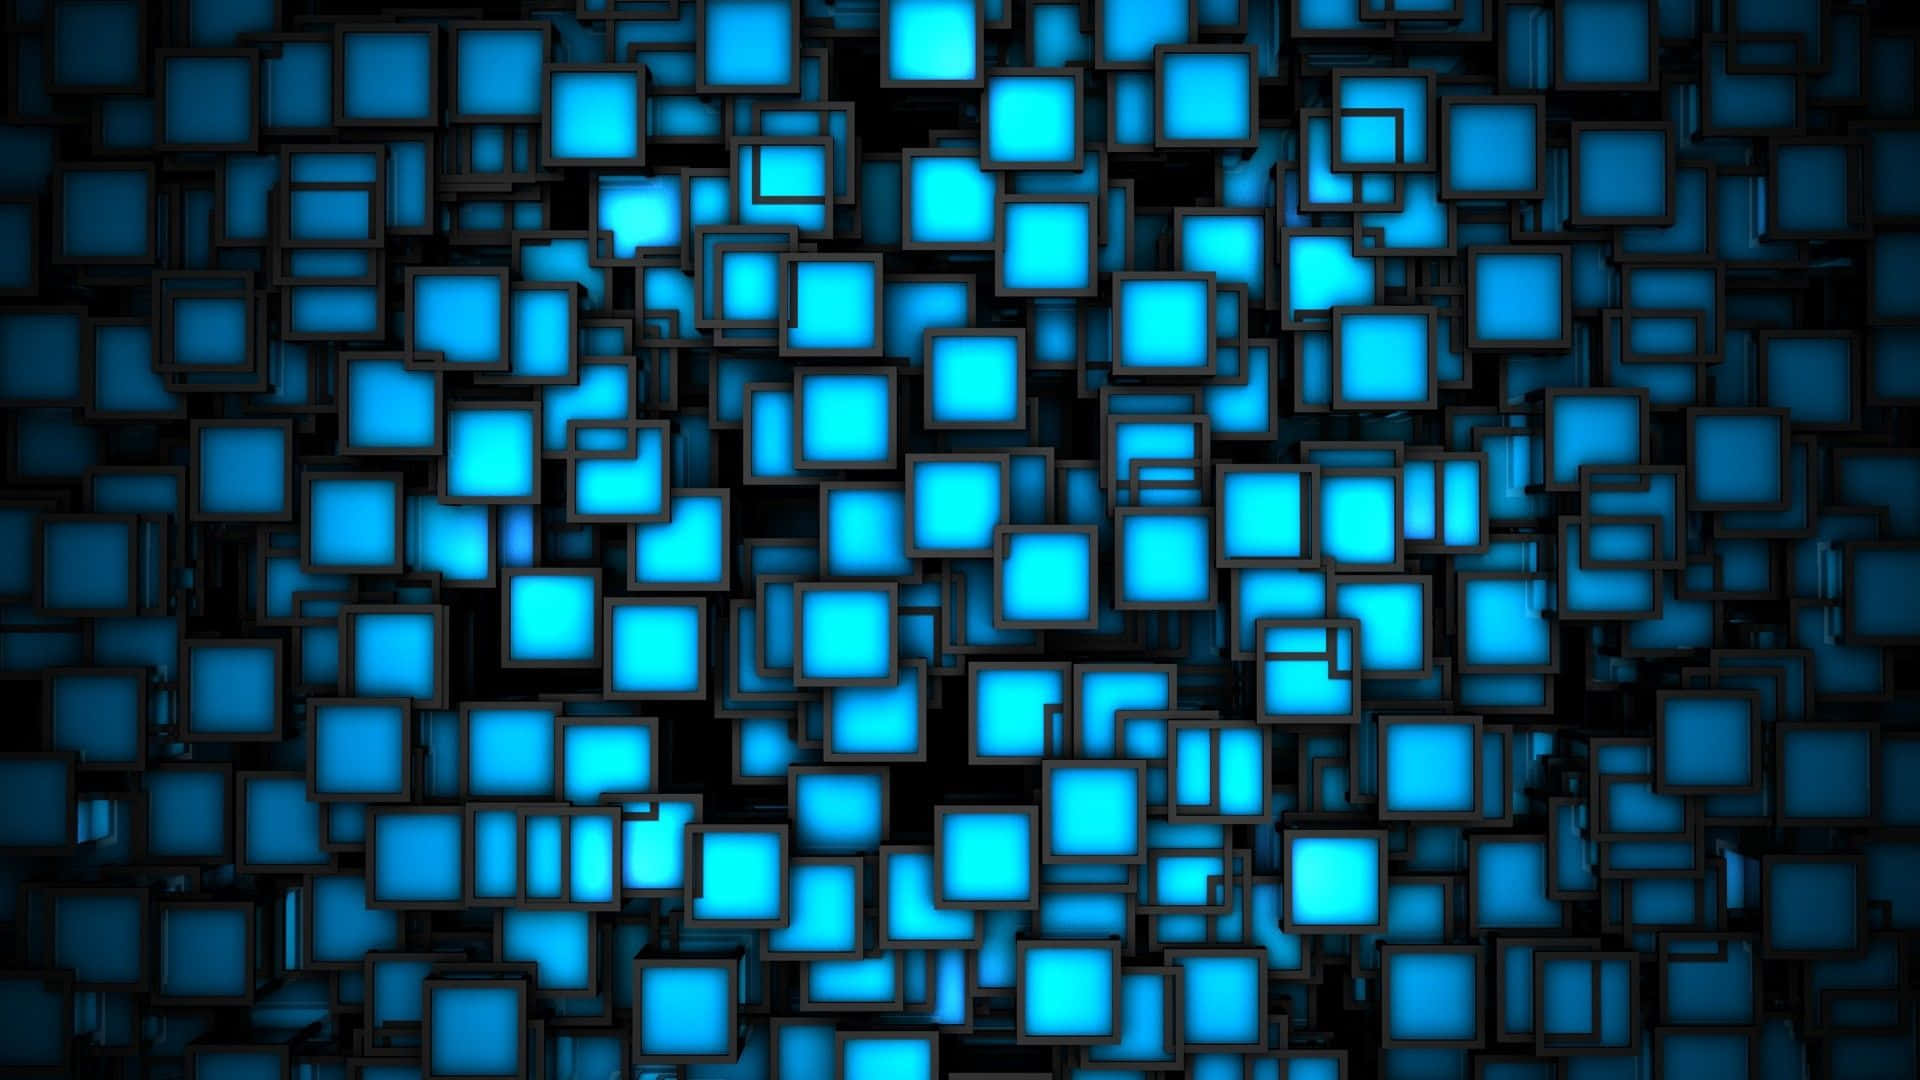 Black And Teal Cubes Wallpaper